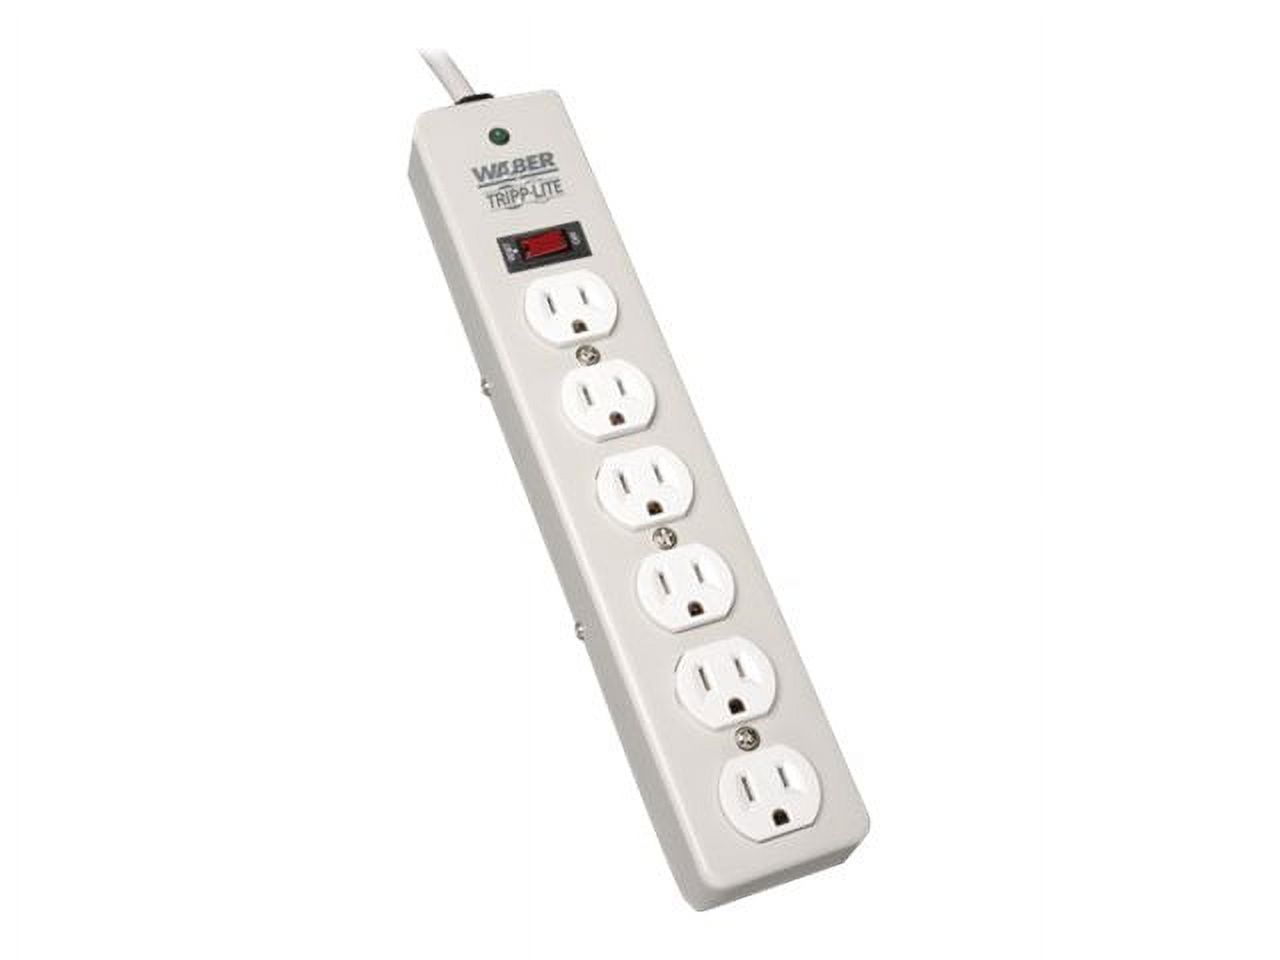 Tripp Lite Waber Surge Protector Strip 6 outlet 6' Cord 2100 Joules - Surge protector - 15 A - AC 120 V - 1.8 kW - output connectors: 6 - gray - image 1 of 5